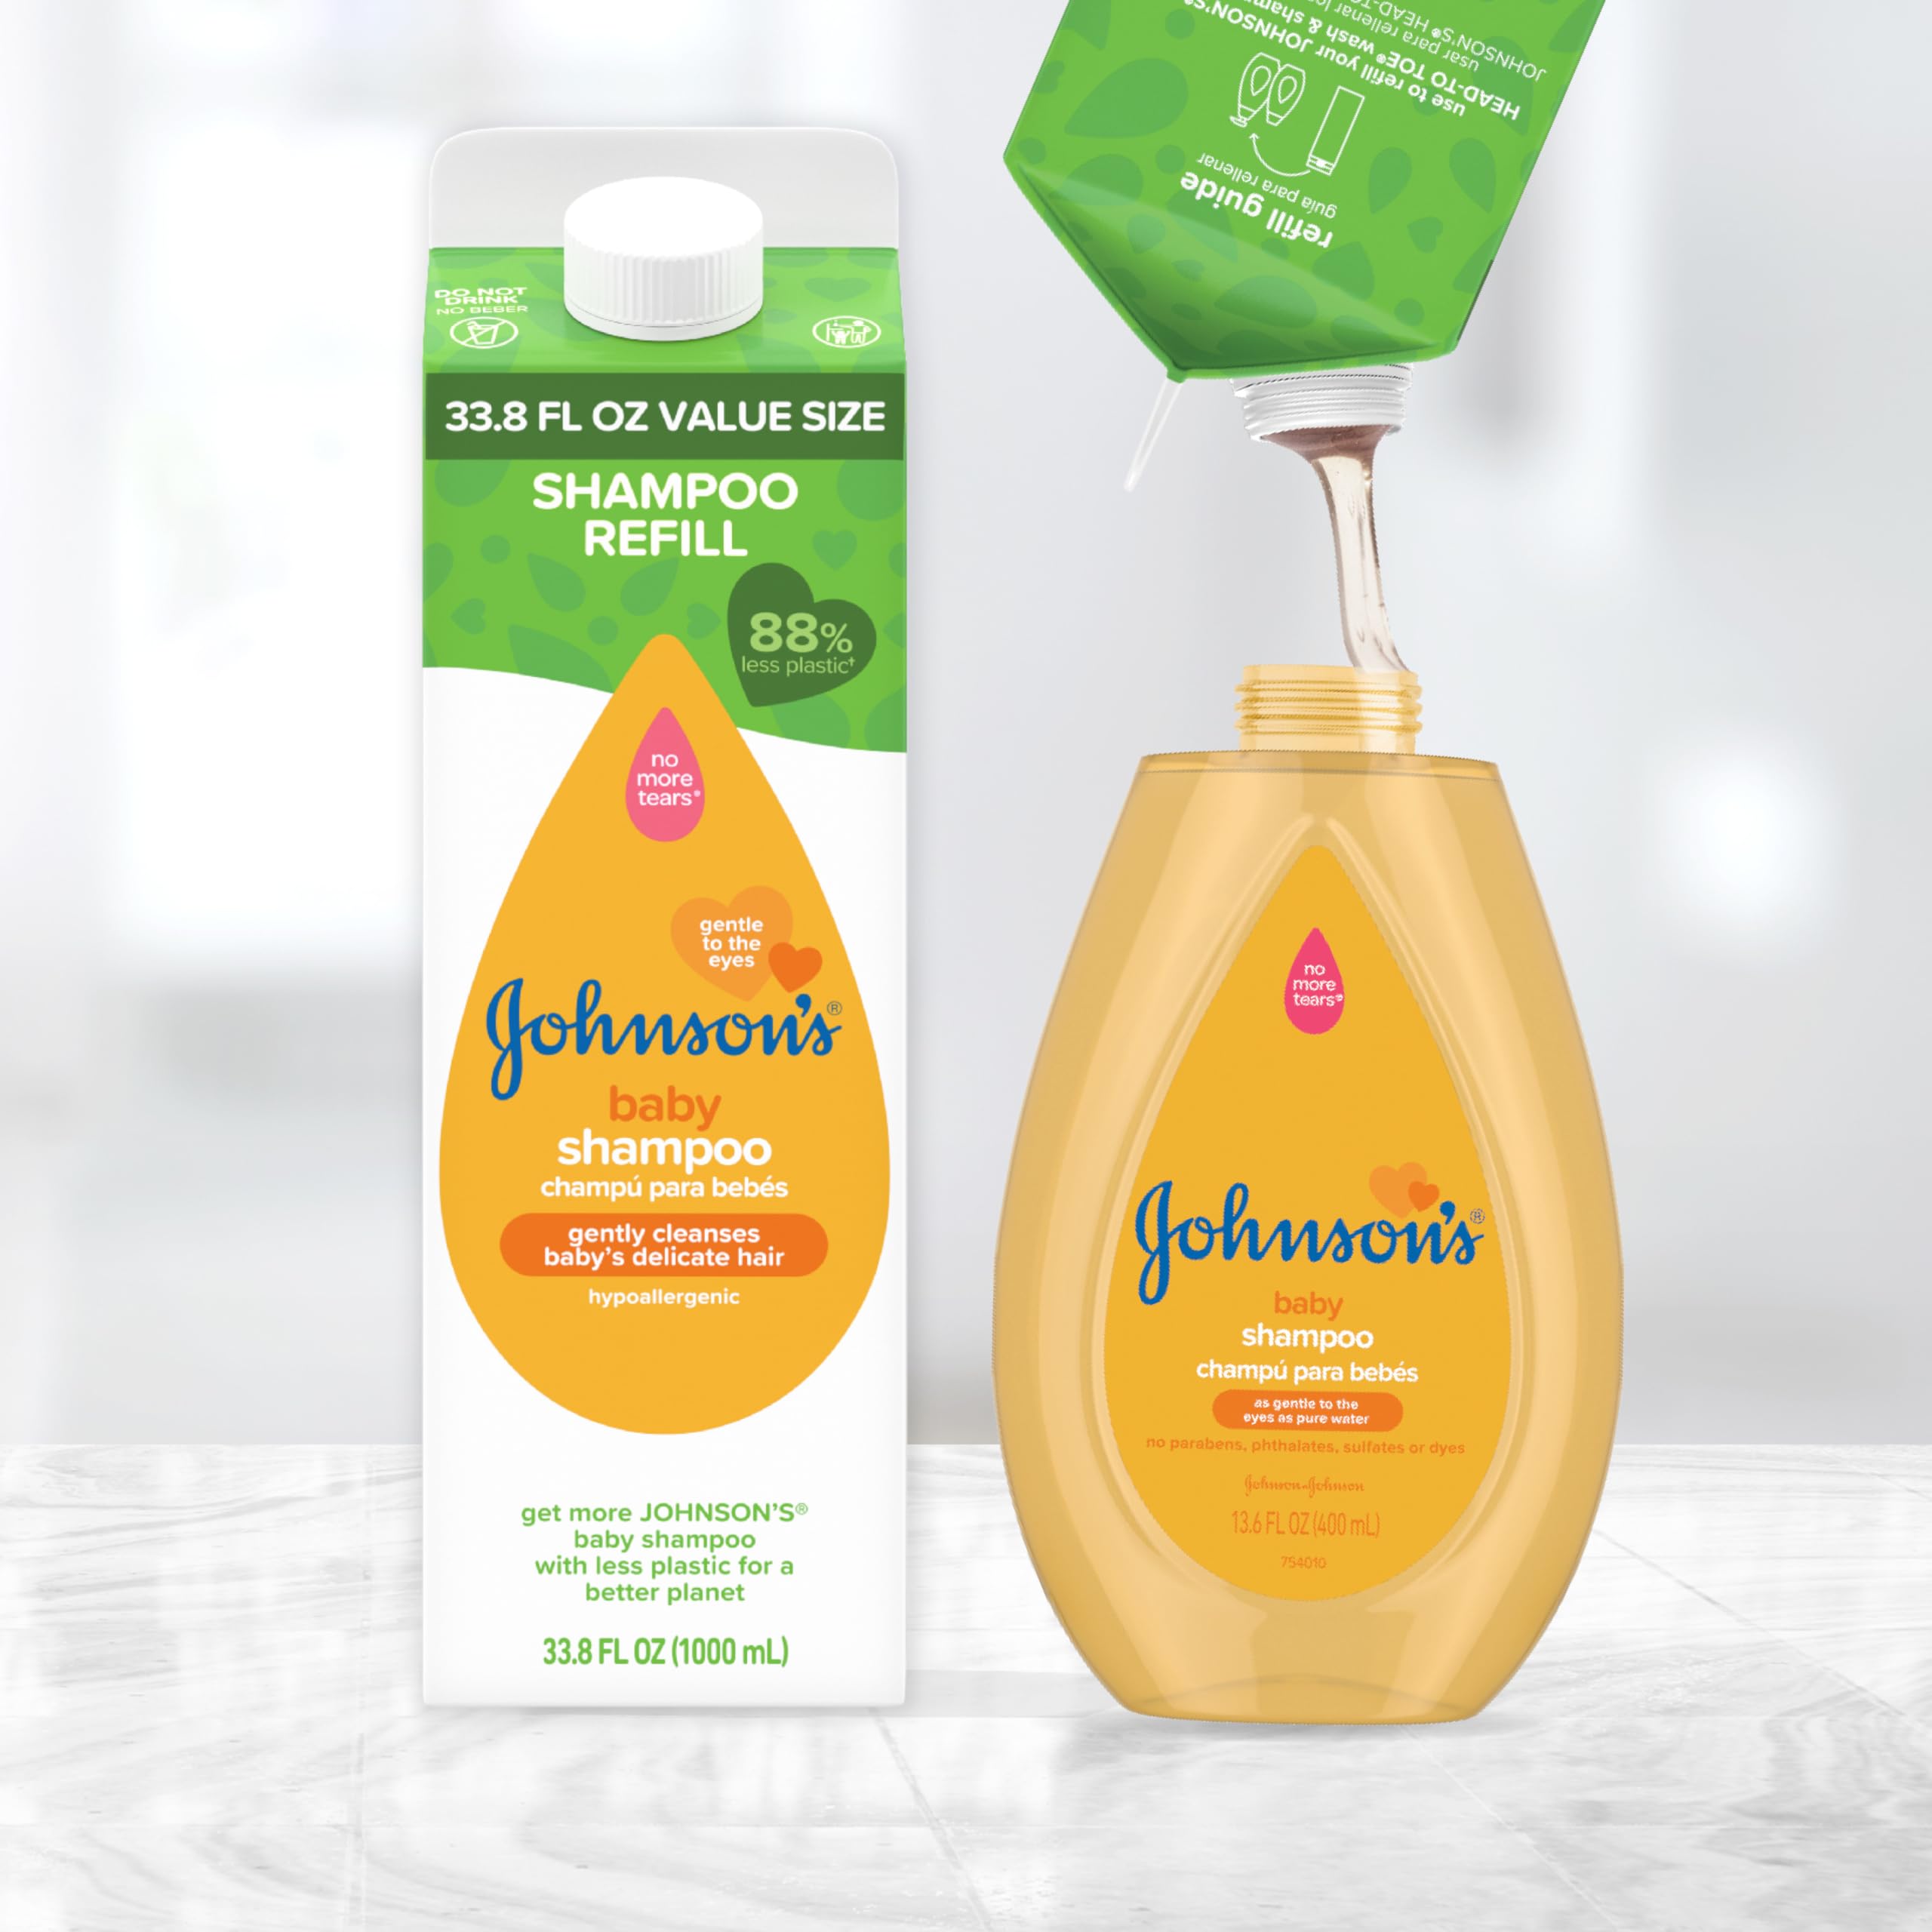 Johnson's Baby Shampoo, Hypoallergenic, Tear-Free Shampoo for Baby's Delicate Scalp & Skin, Gently Washes Away Dirt & Germs, Paraben-Free, Value Size Baby Shampoo Refill, 33.8 fl. oz